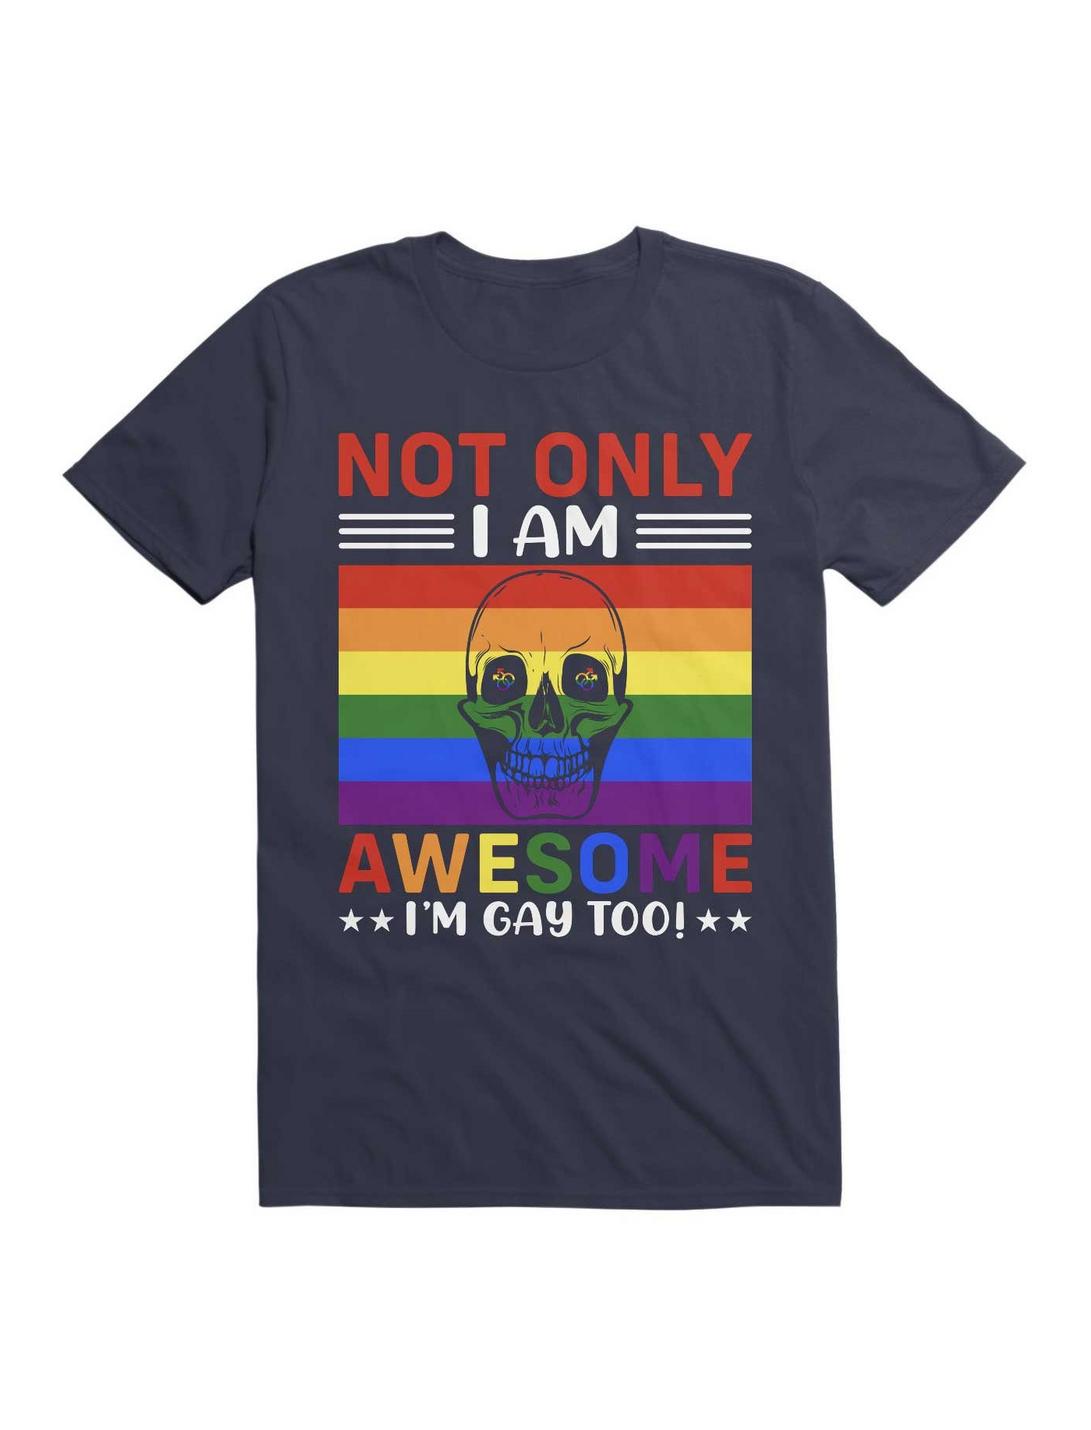 Not Only I'm Gay I Am Awesome Too! T-Shirt, NAVY, hi-res